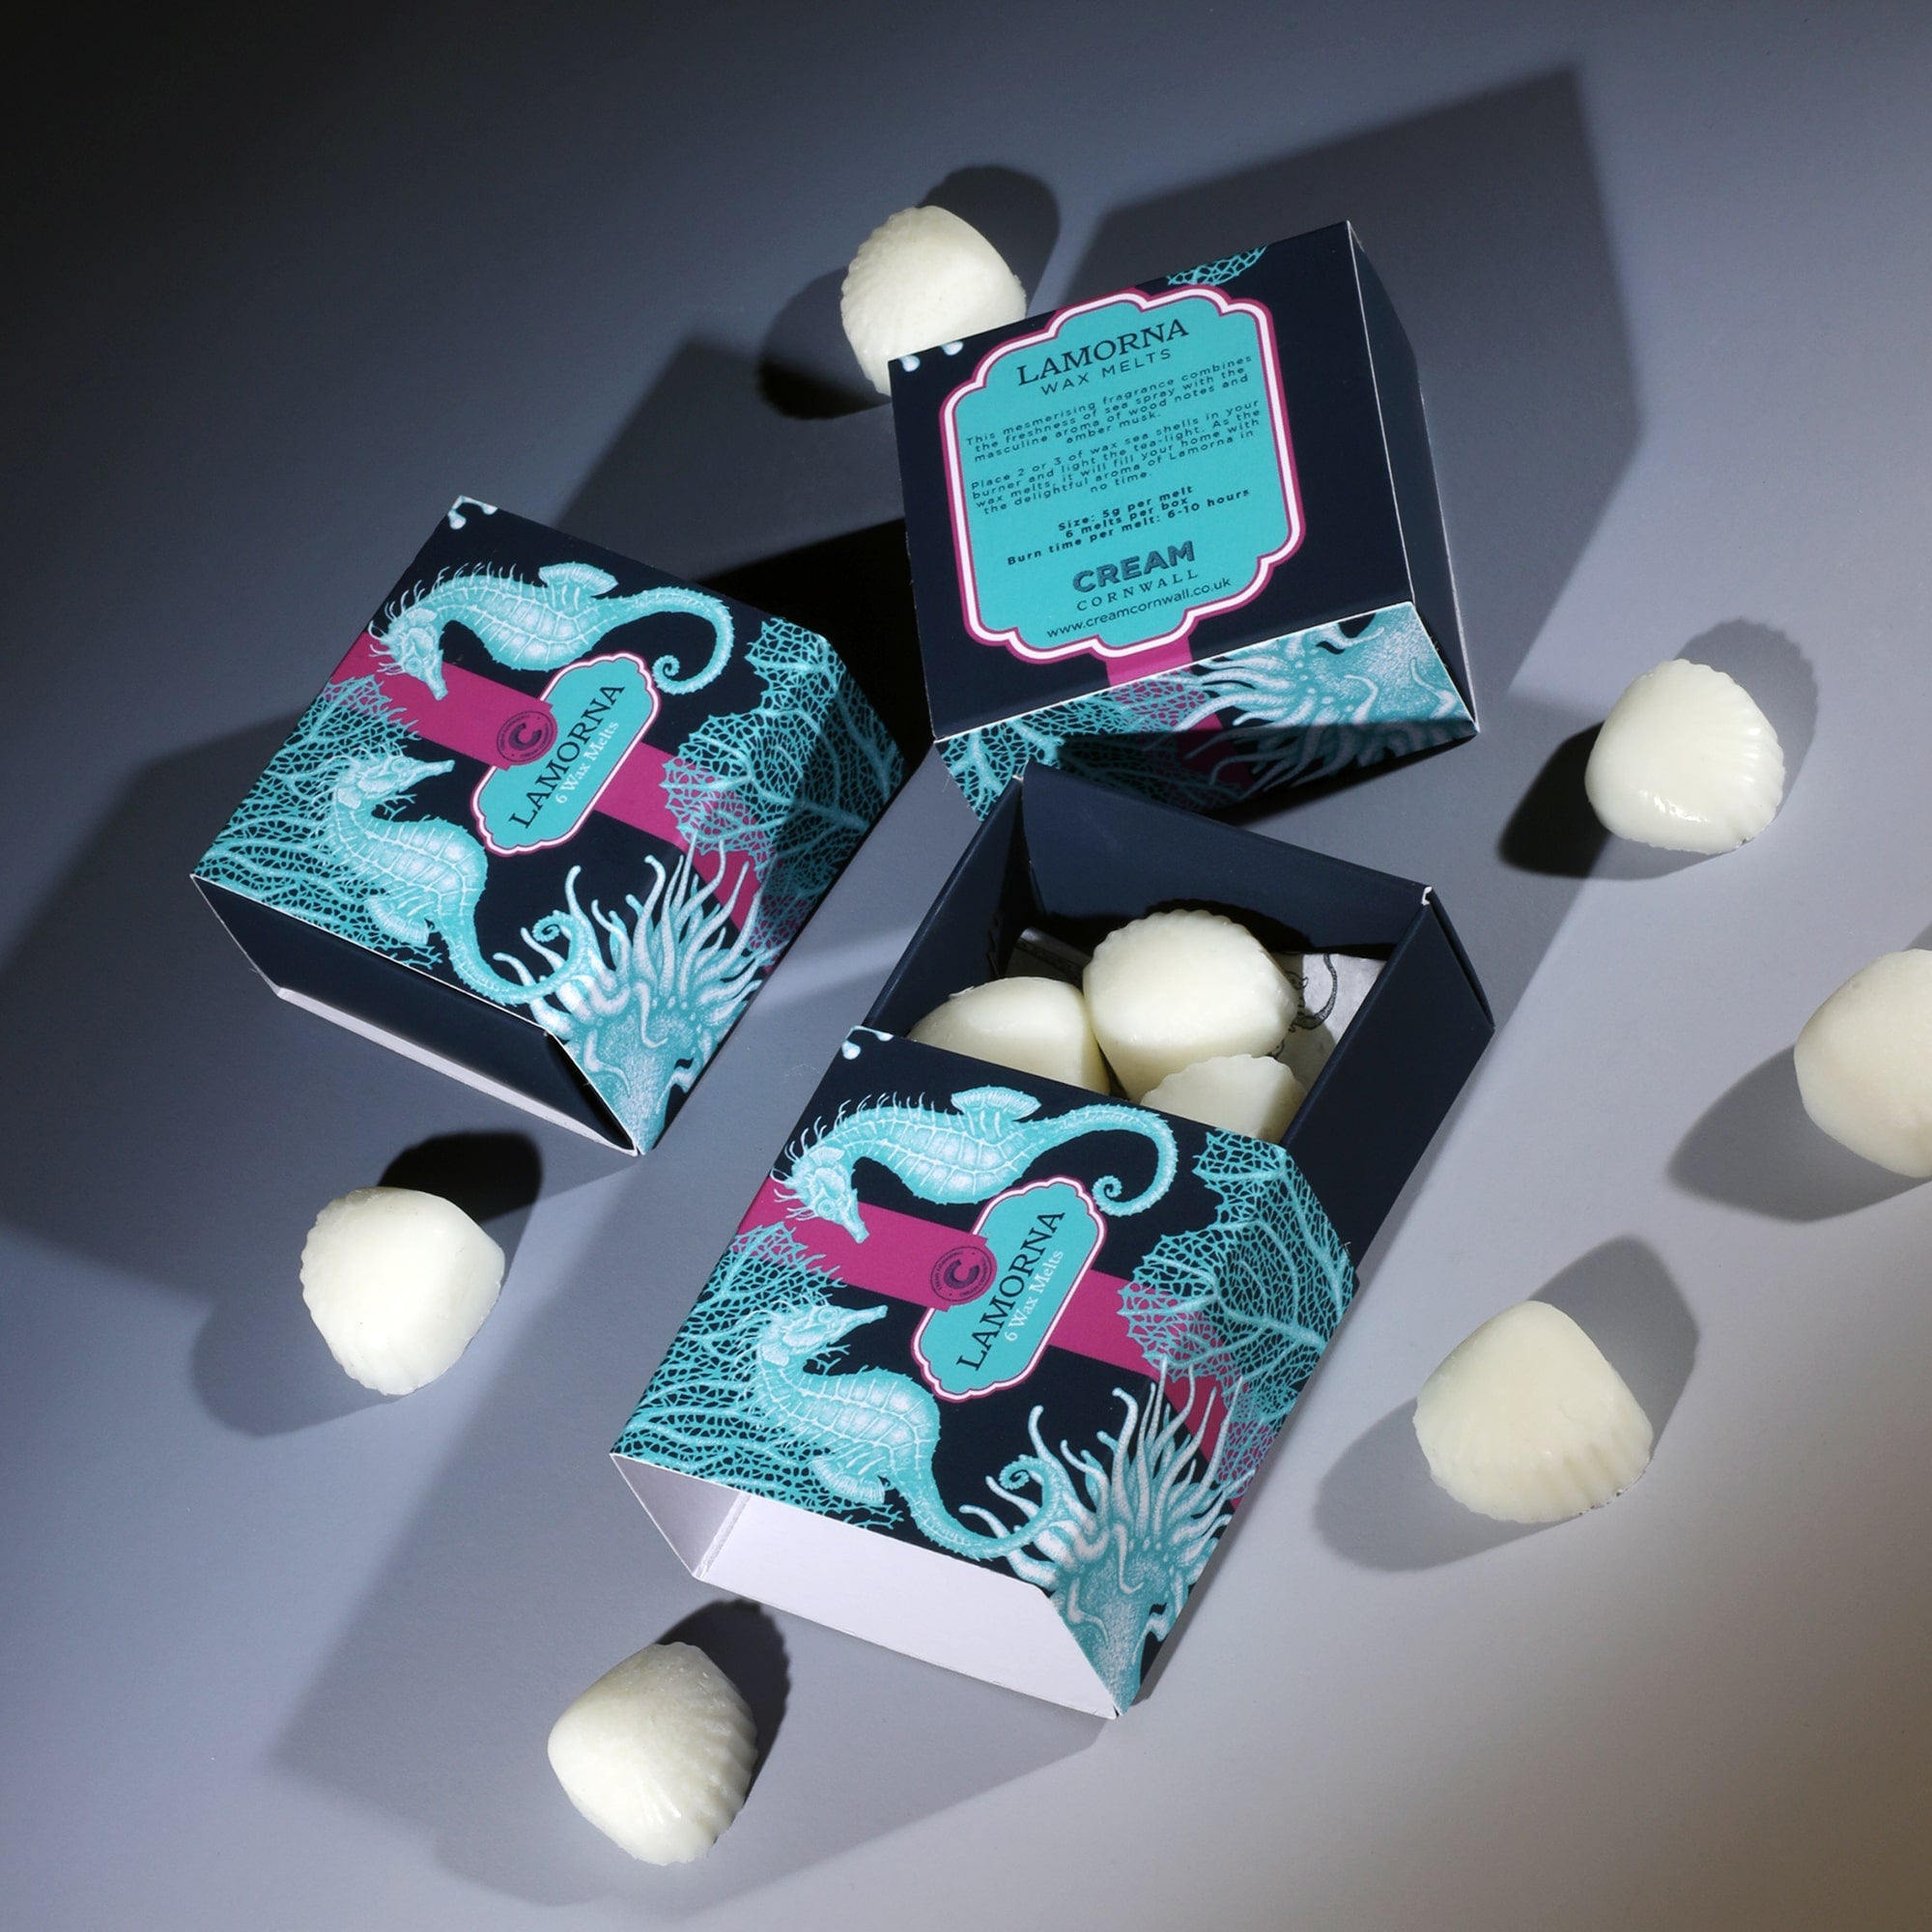 3 boxes decorated with seahorse, anemone and coral design in turquoise on a navy box with a cerise band running around the middle, with 5 wax melts in the shape of shells around the box and sitting on a blue ombre ground